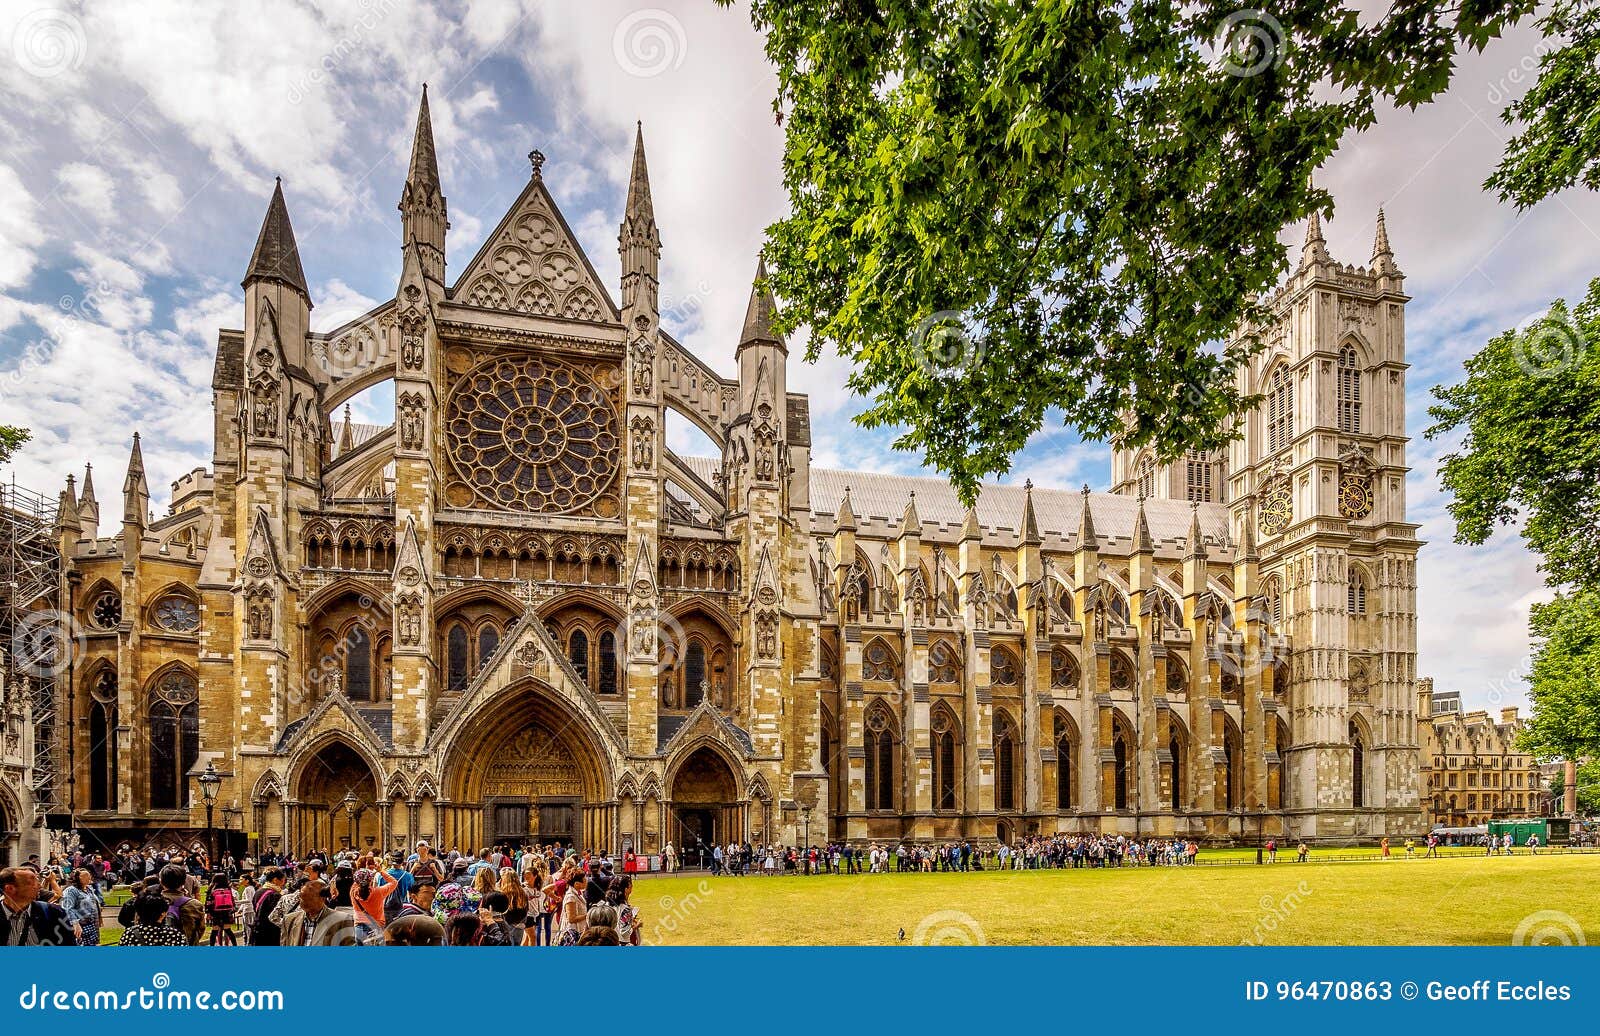 westminster abbey panoramic